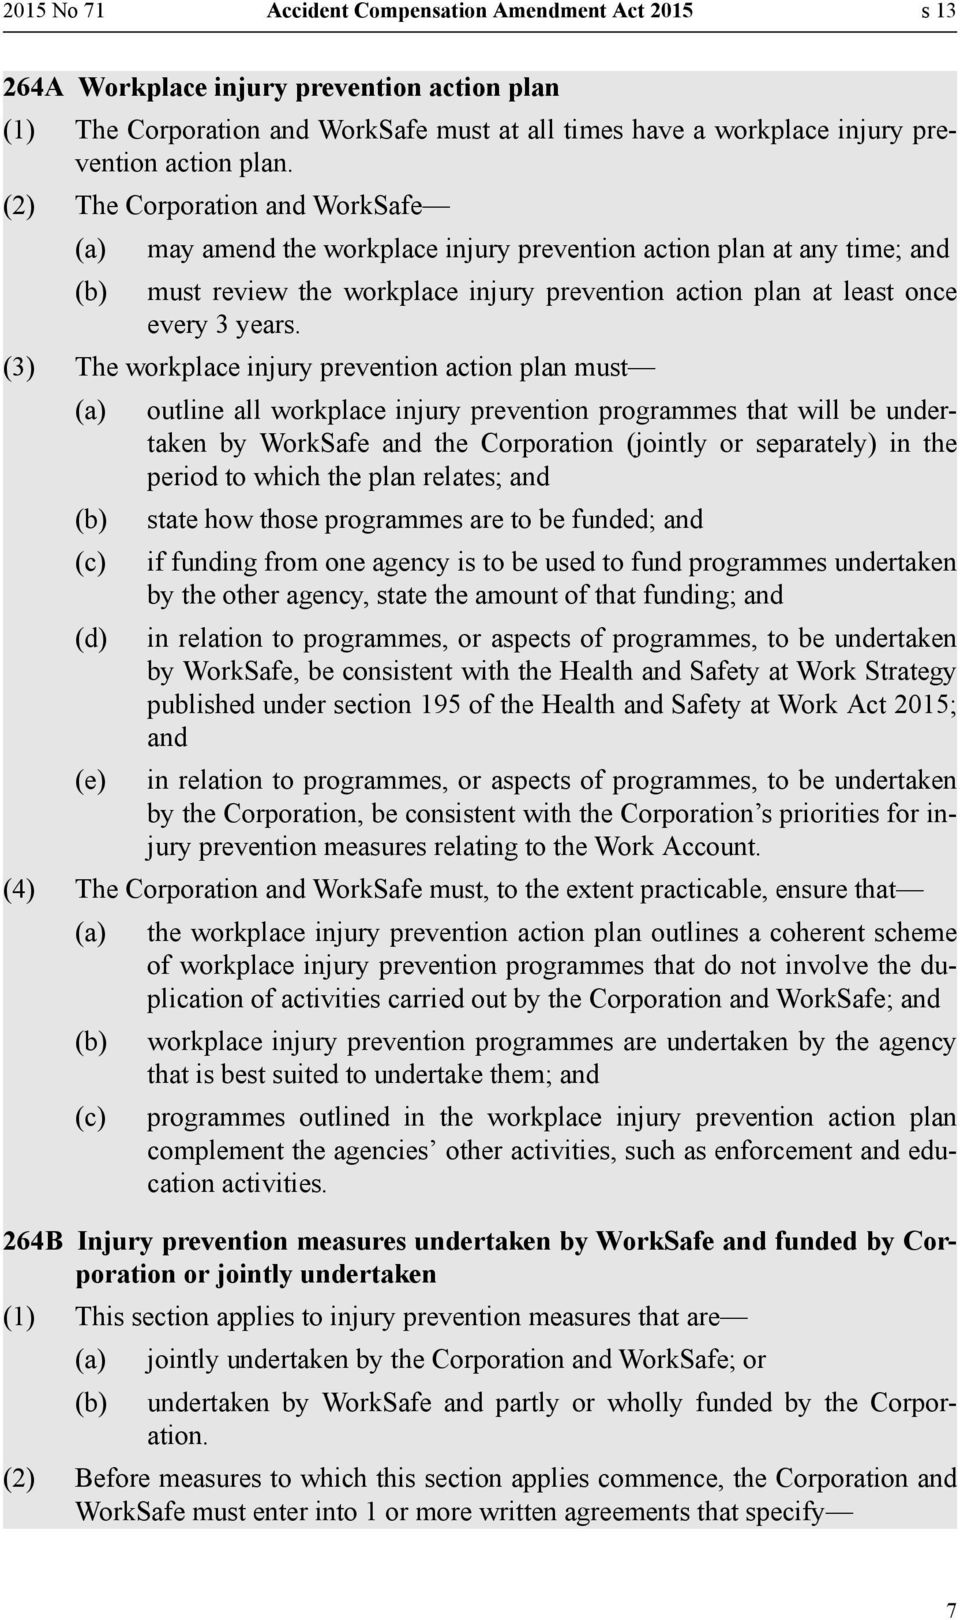 (3) The workplace injury prevention action plan must (d) (e) outline all workplace injury prevention programmes that will be undertaken by WorkSafe and the Corporation (jointly or separately) in the